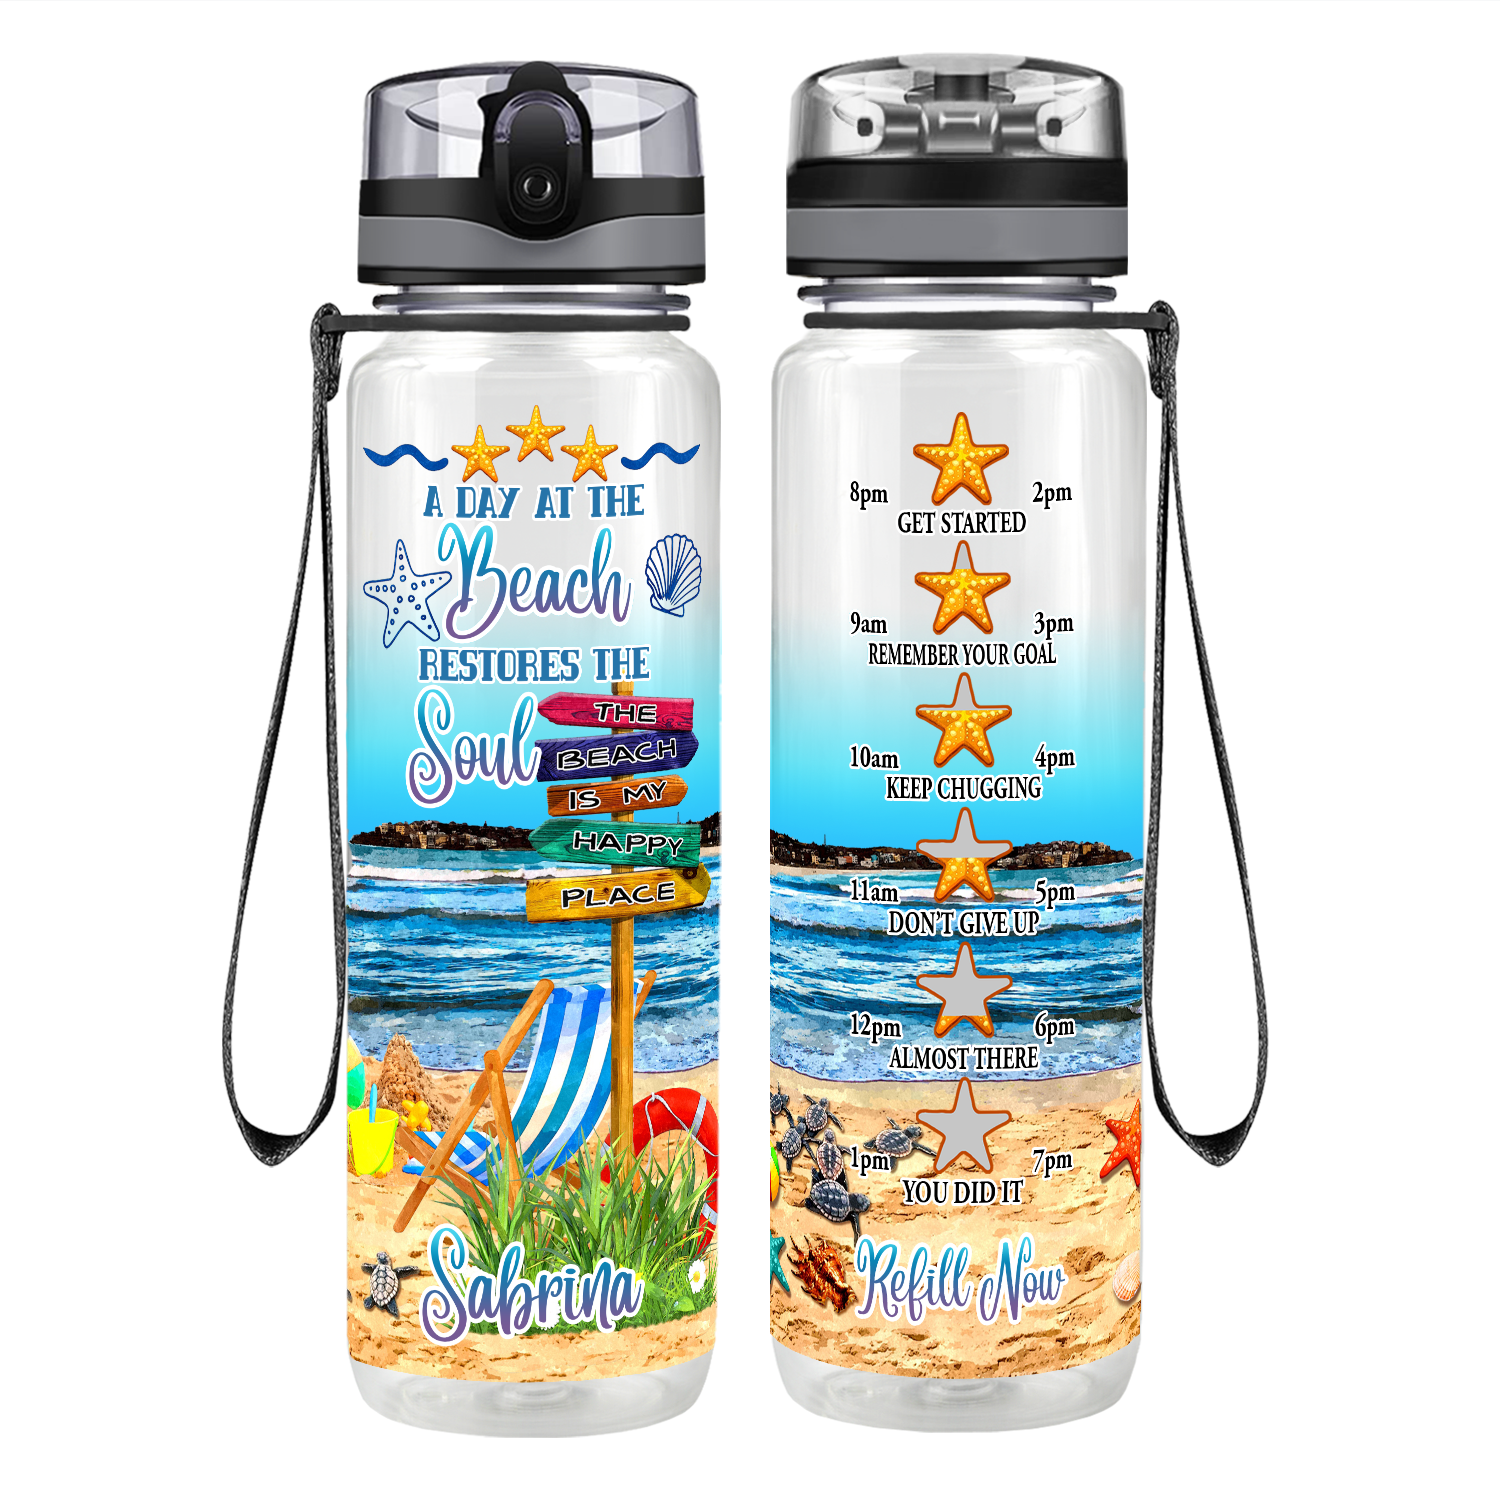 Personalized A Day at The Beach Restores Soul Motivational Tracking Water Bottle